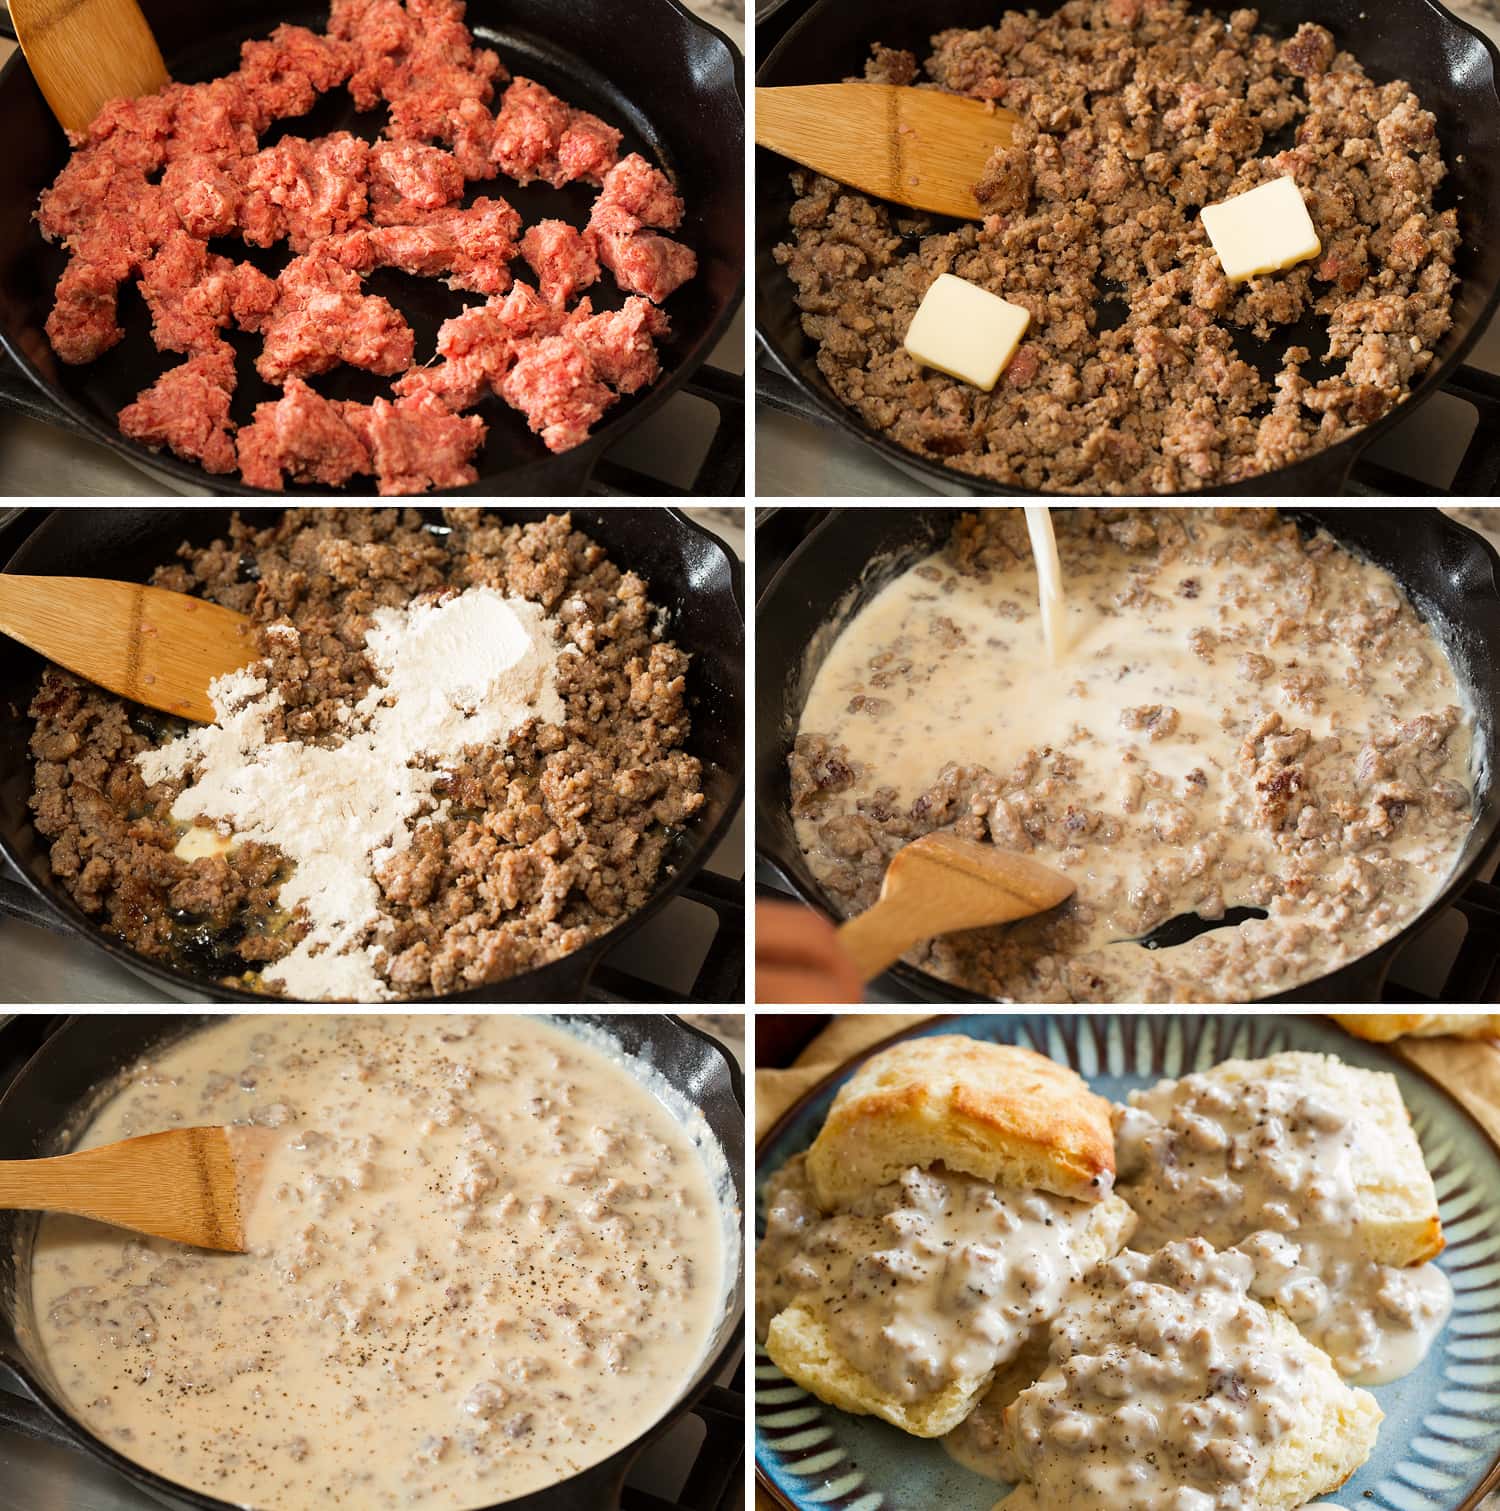 Six photos showing how to make sausage gravy.